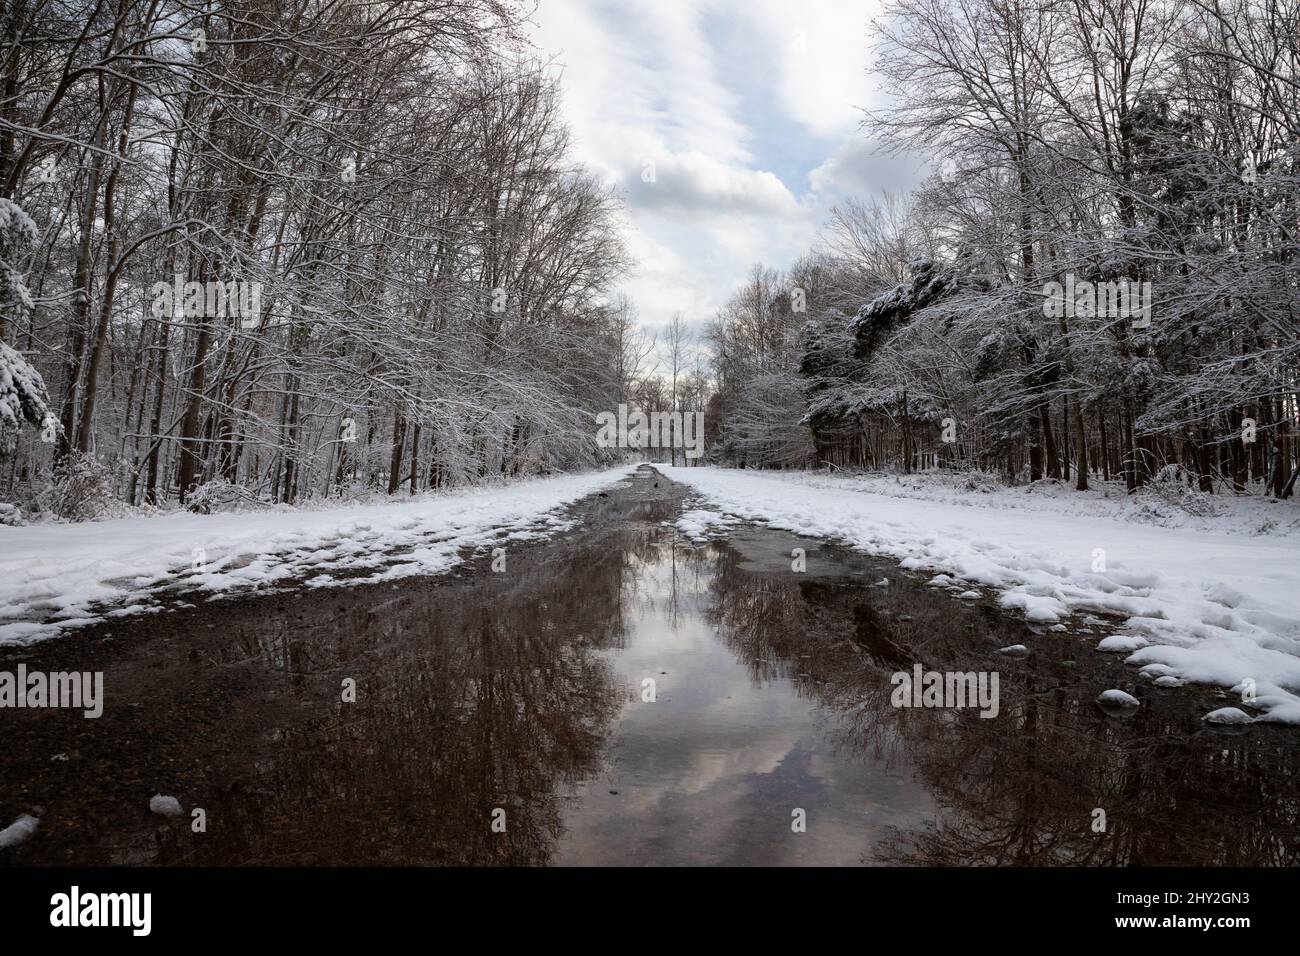 Snowy gravel path in the winter woods Stock Photo